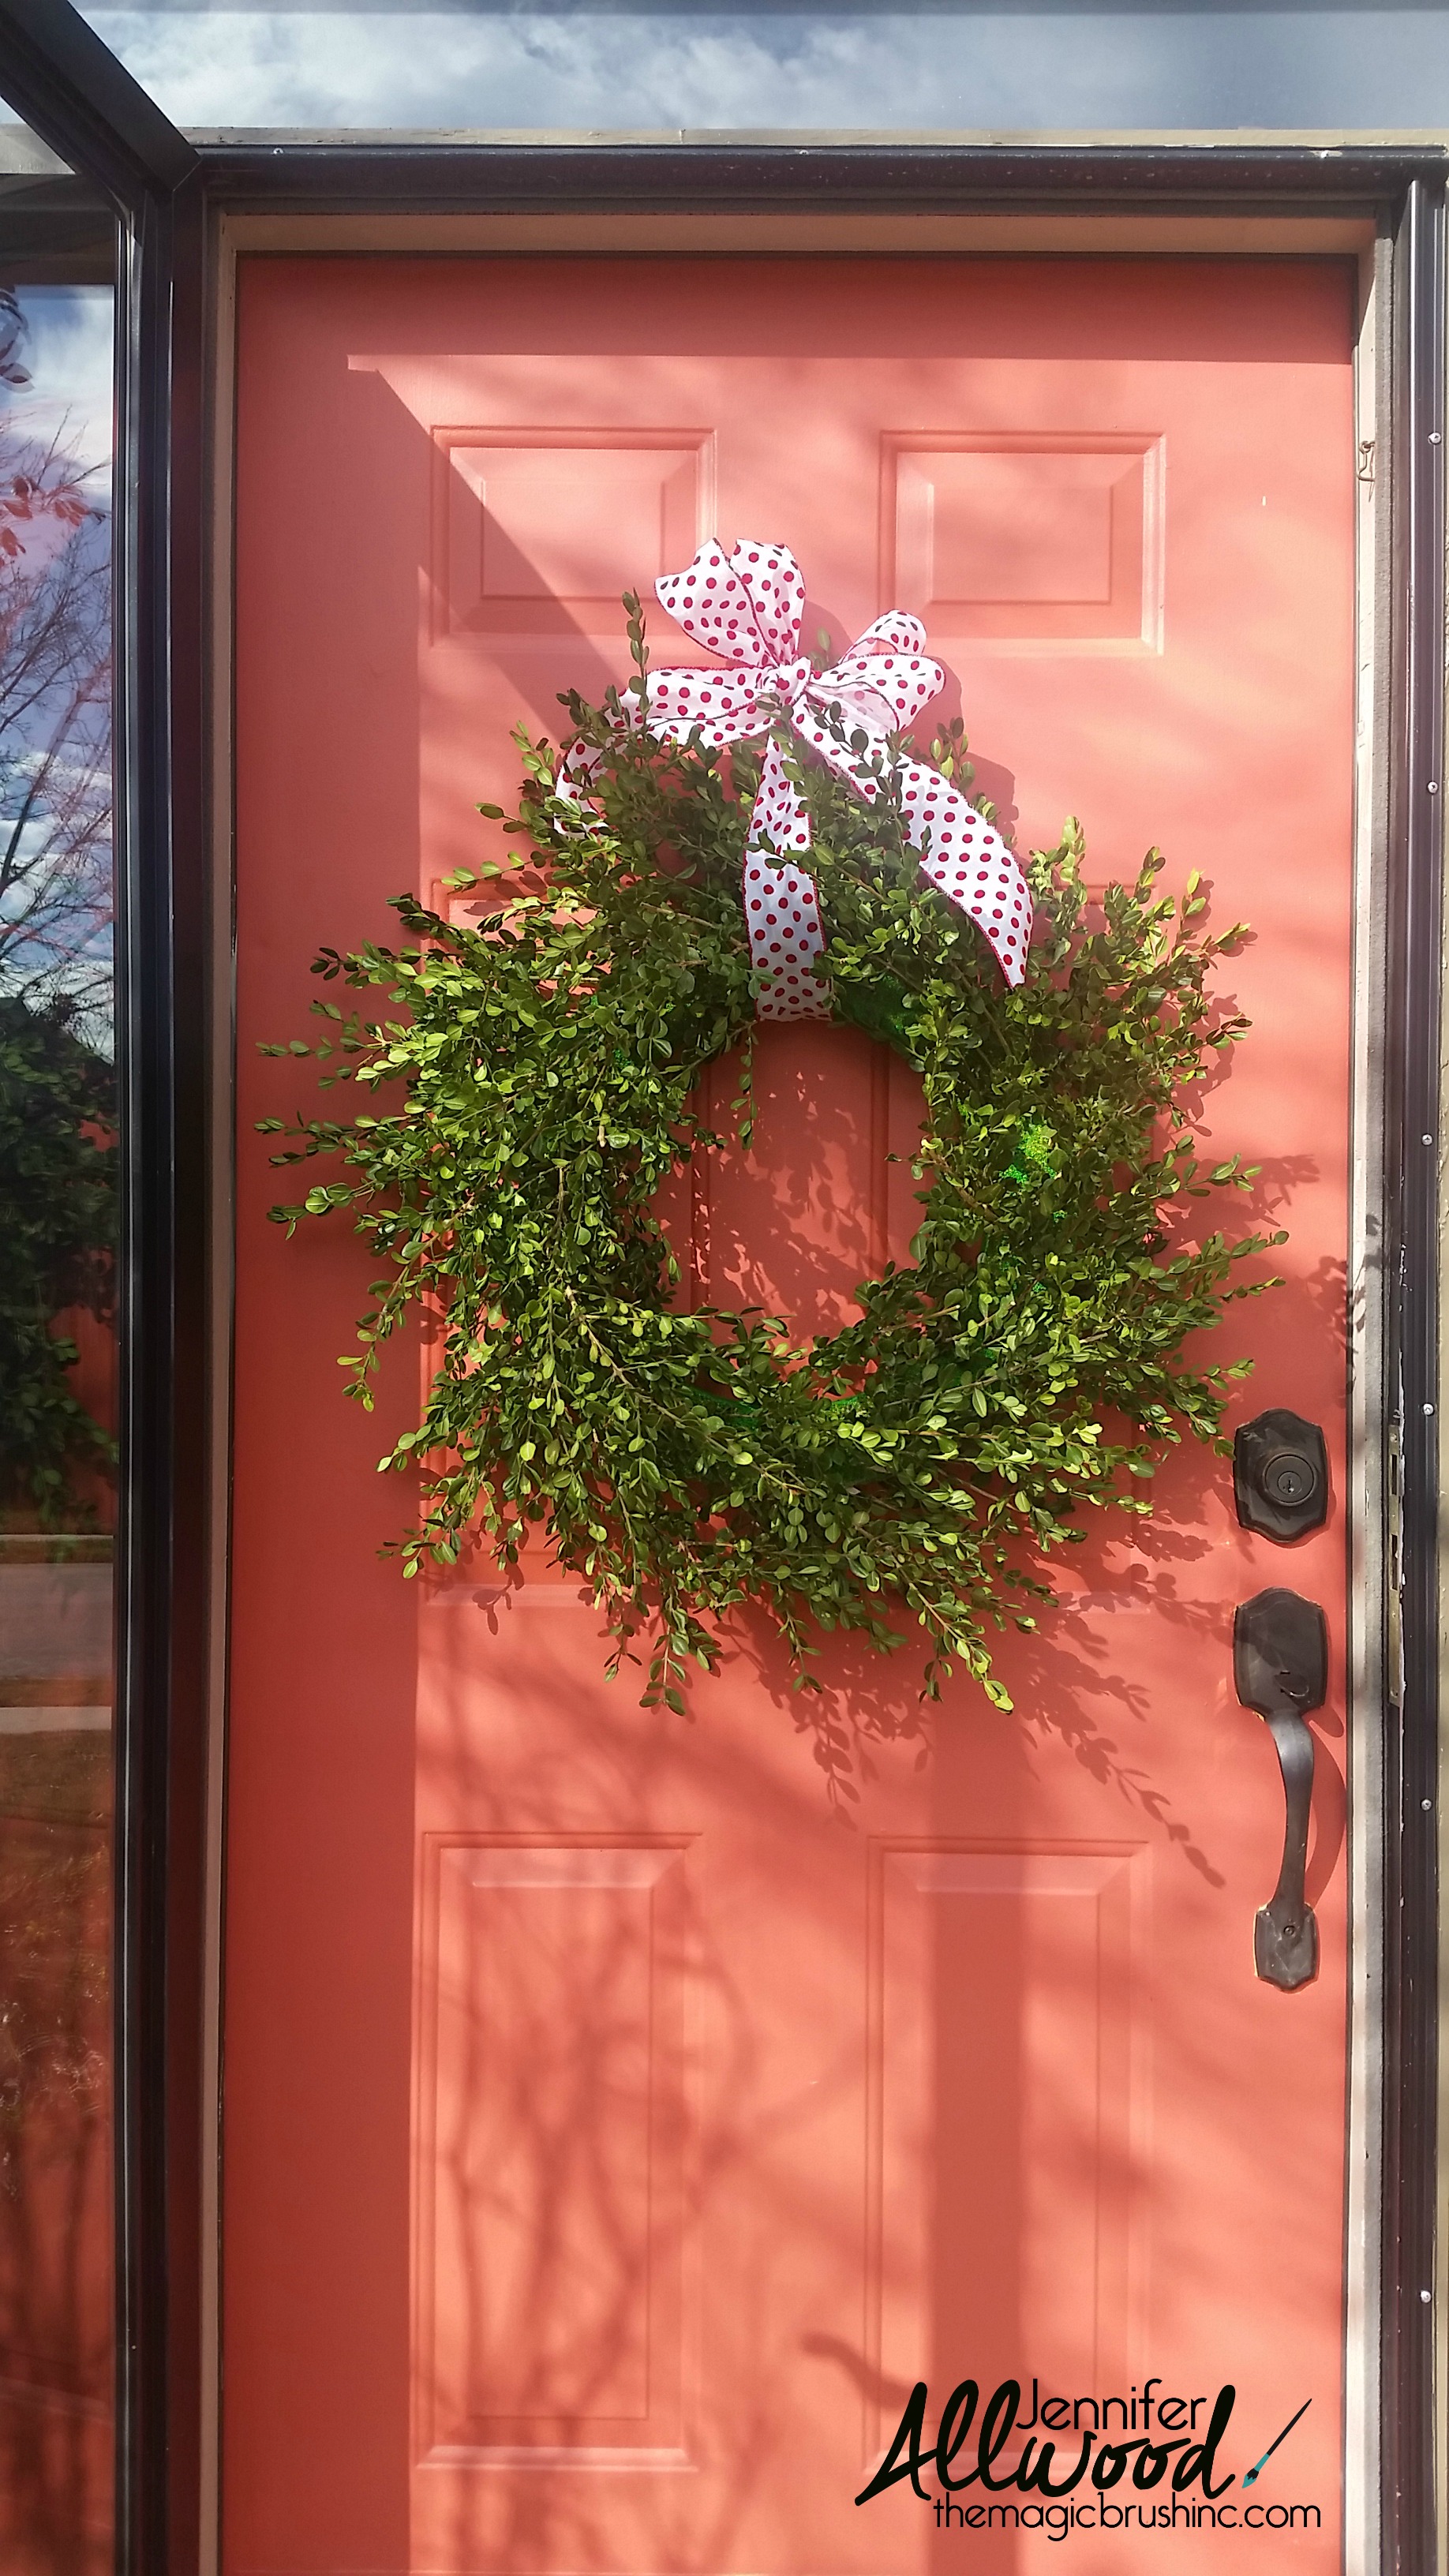 My Homemade Boxwood wreath – what worked and what didn’t